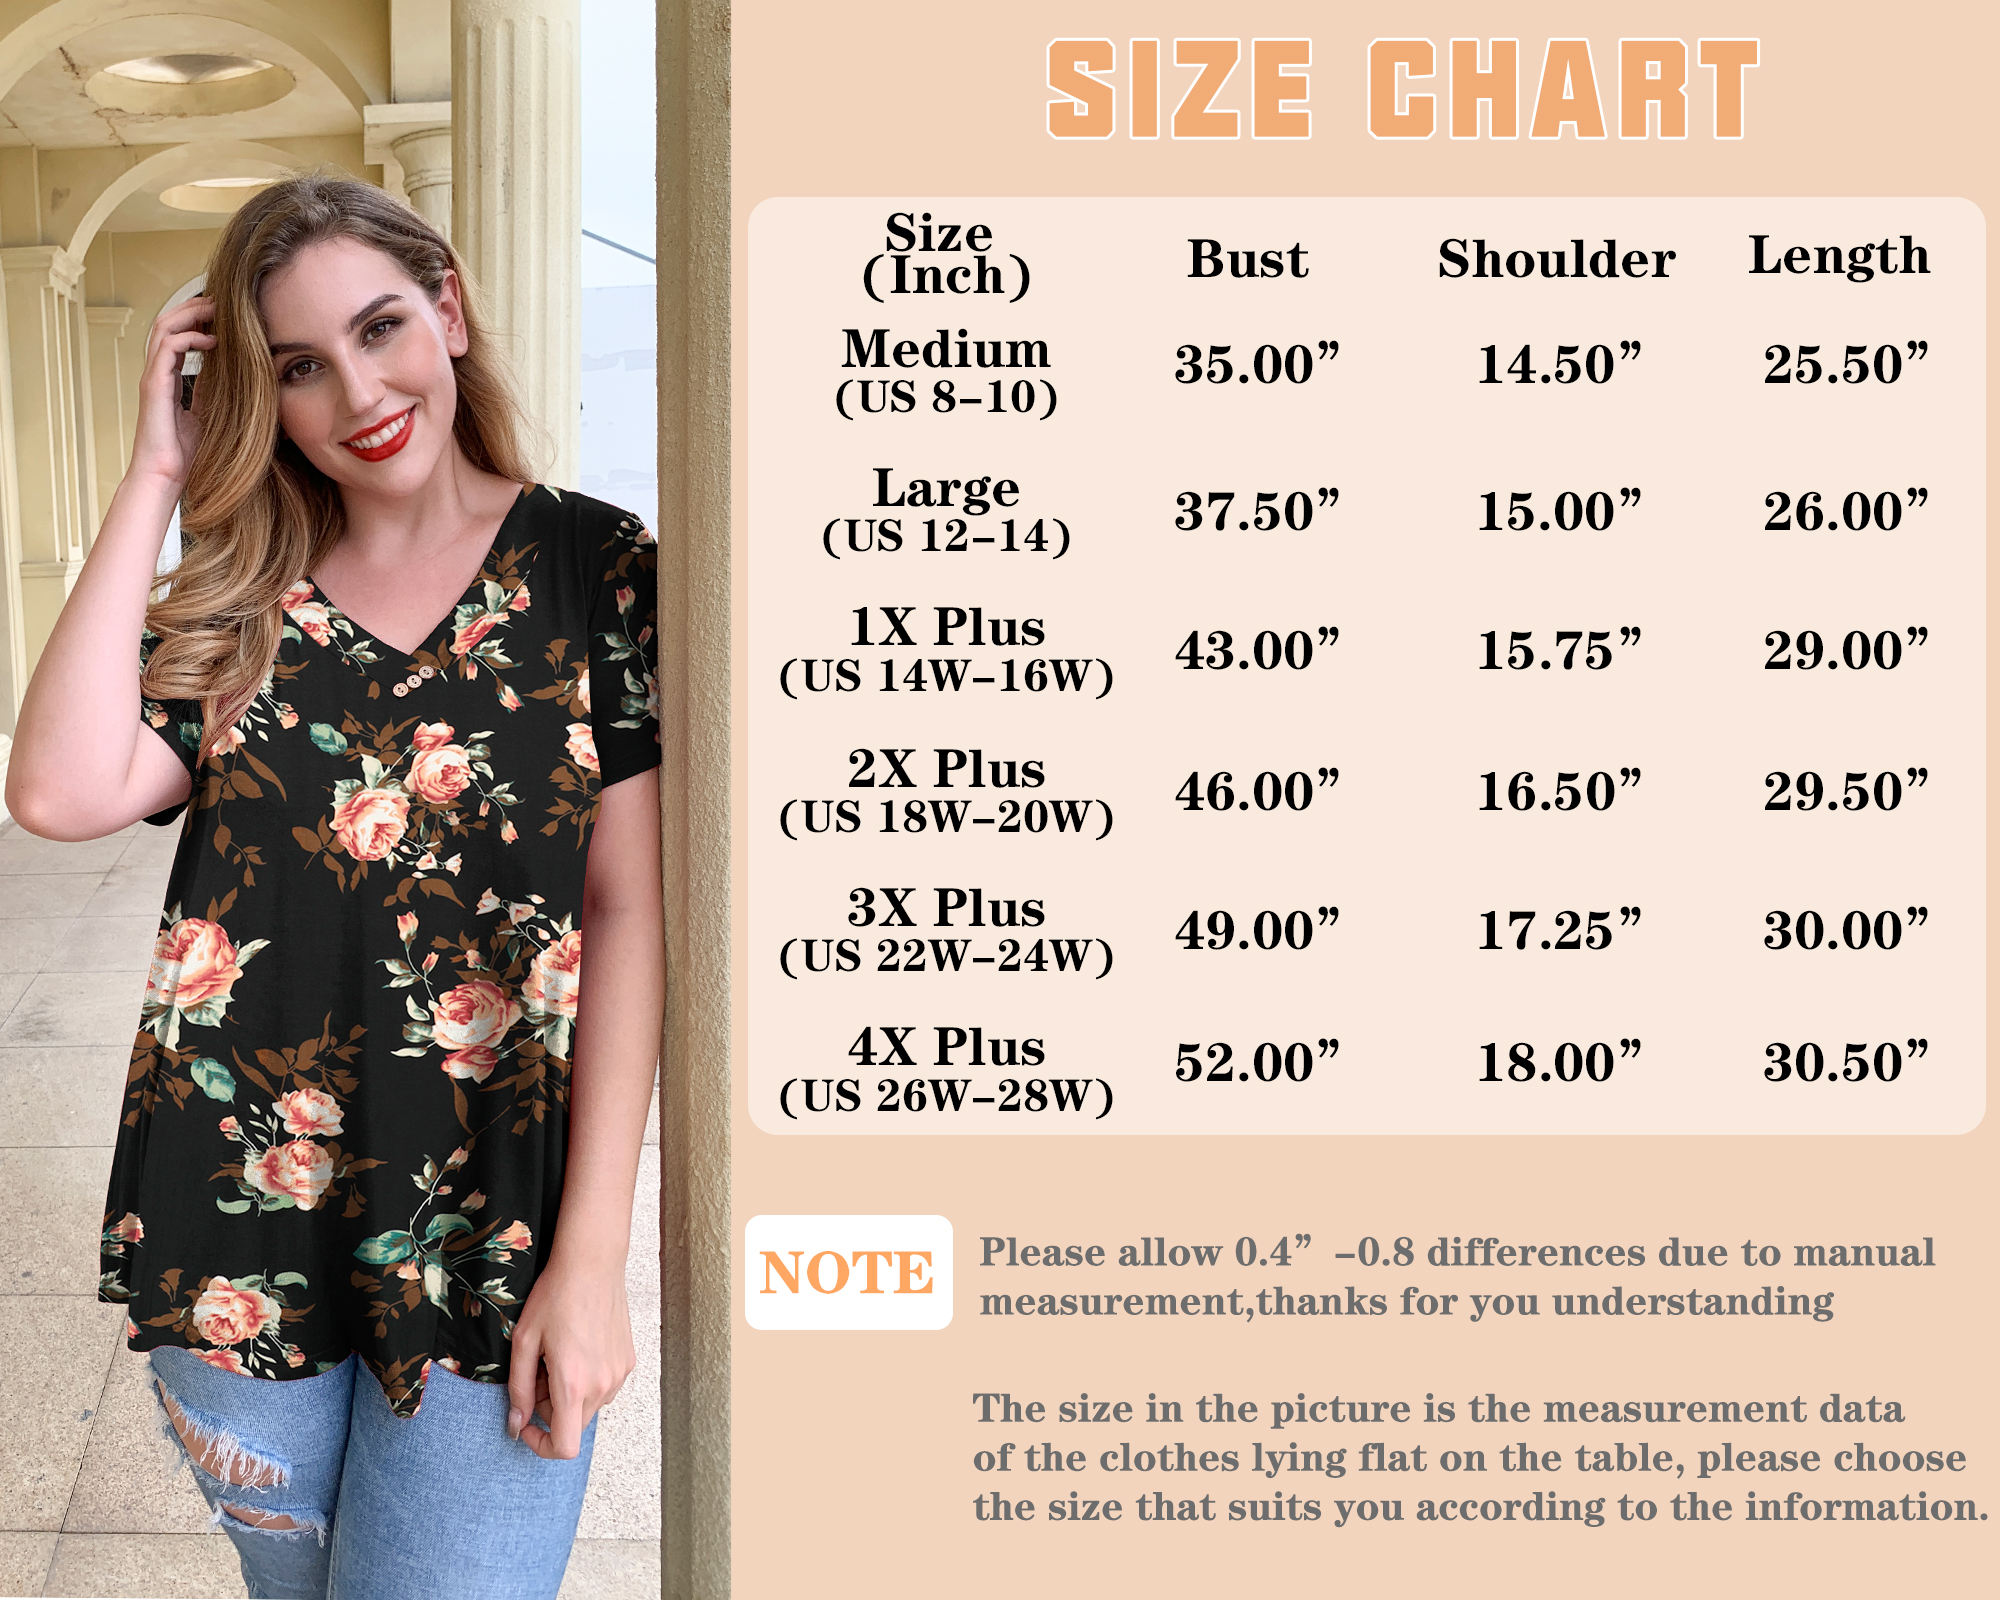 VOIANLIMO Womens Plus Size Casual Tops V Neck Short Sleeve Shirt Floral ...